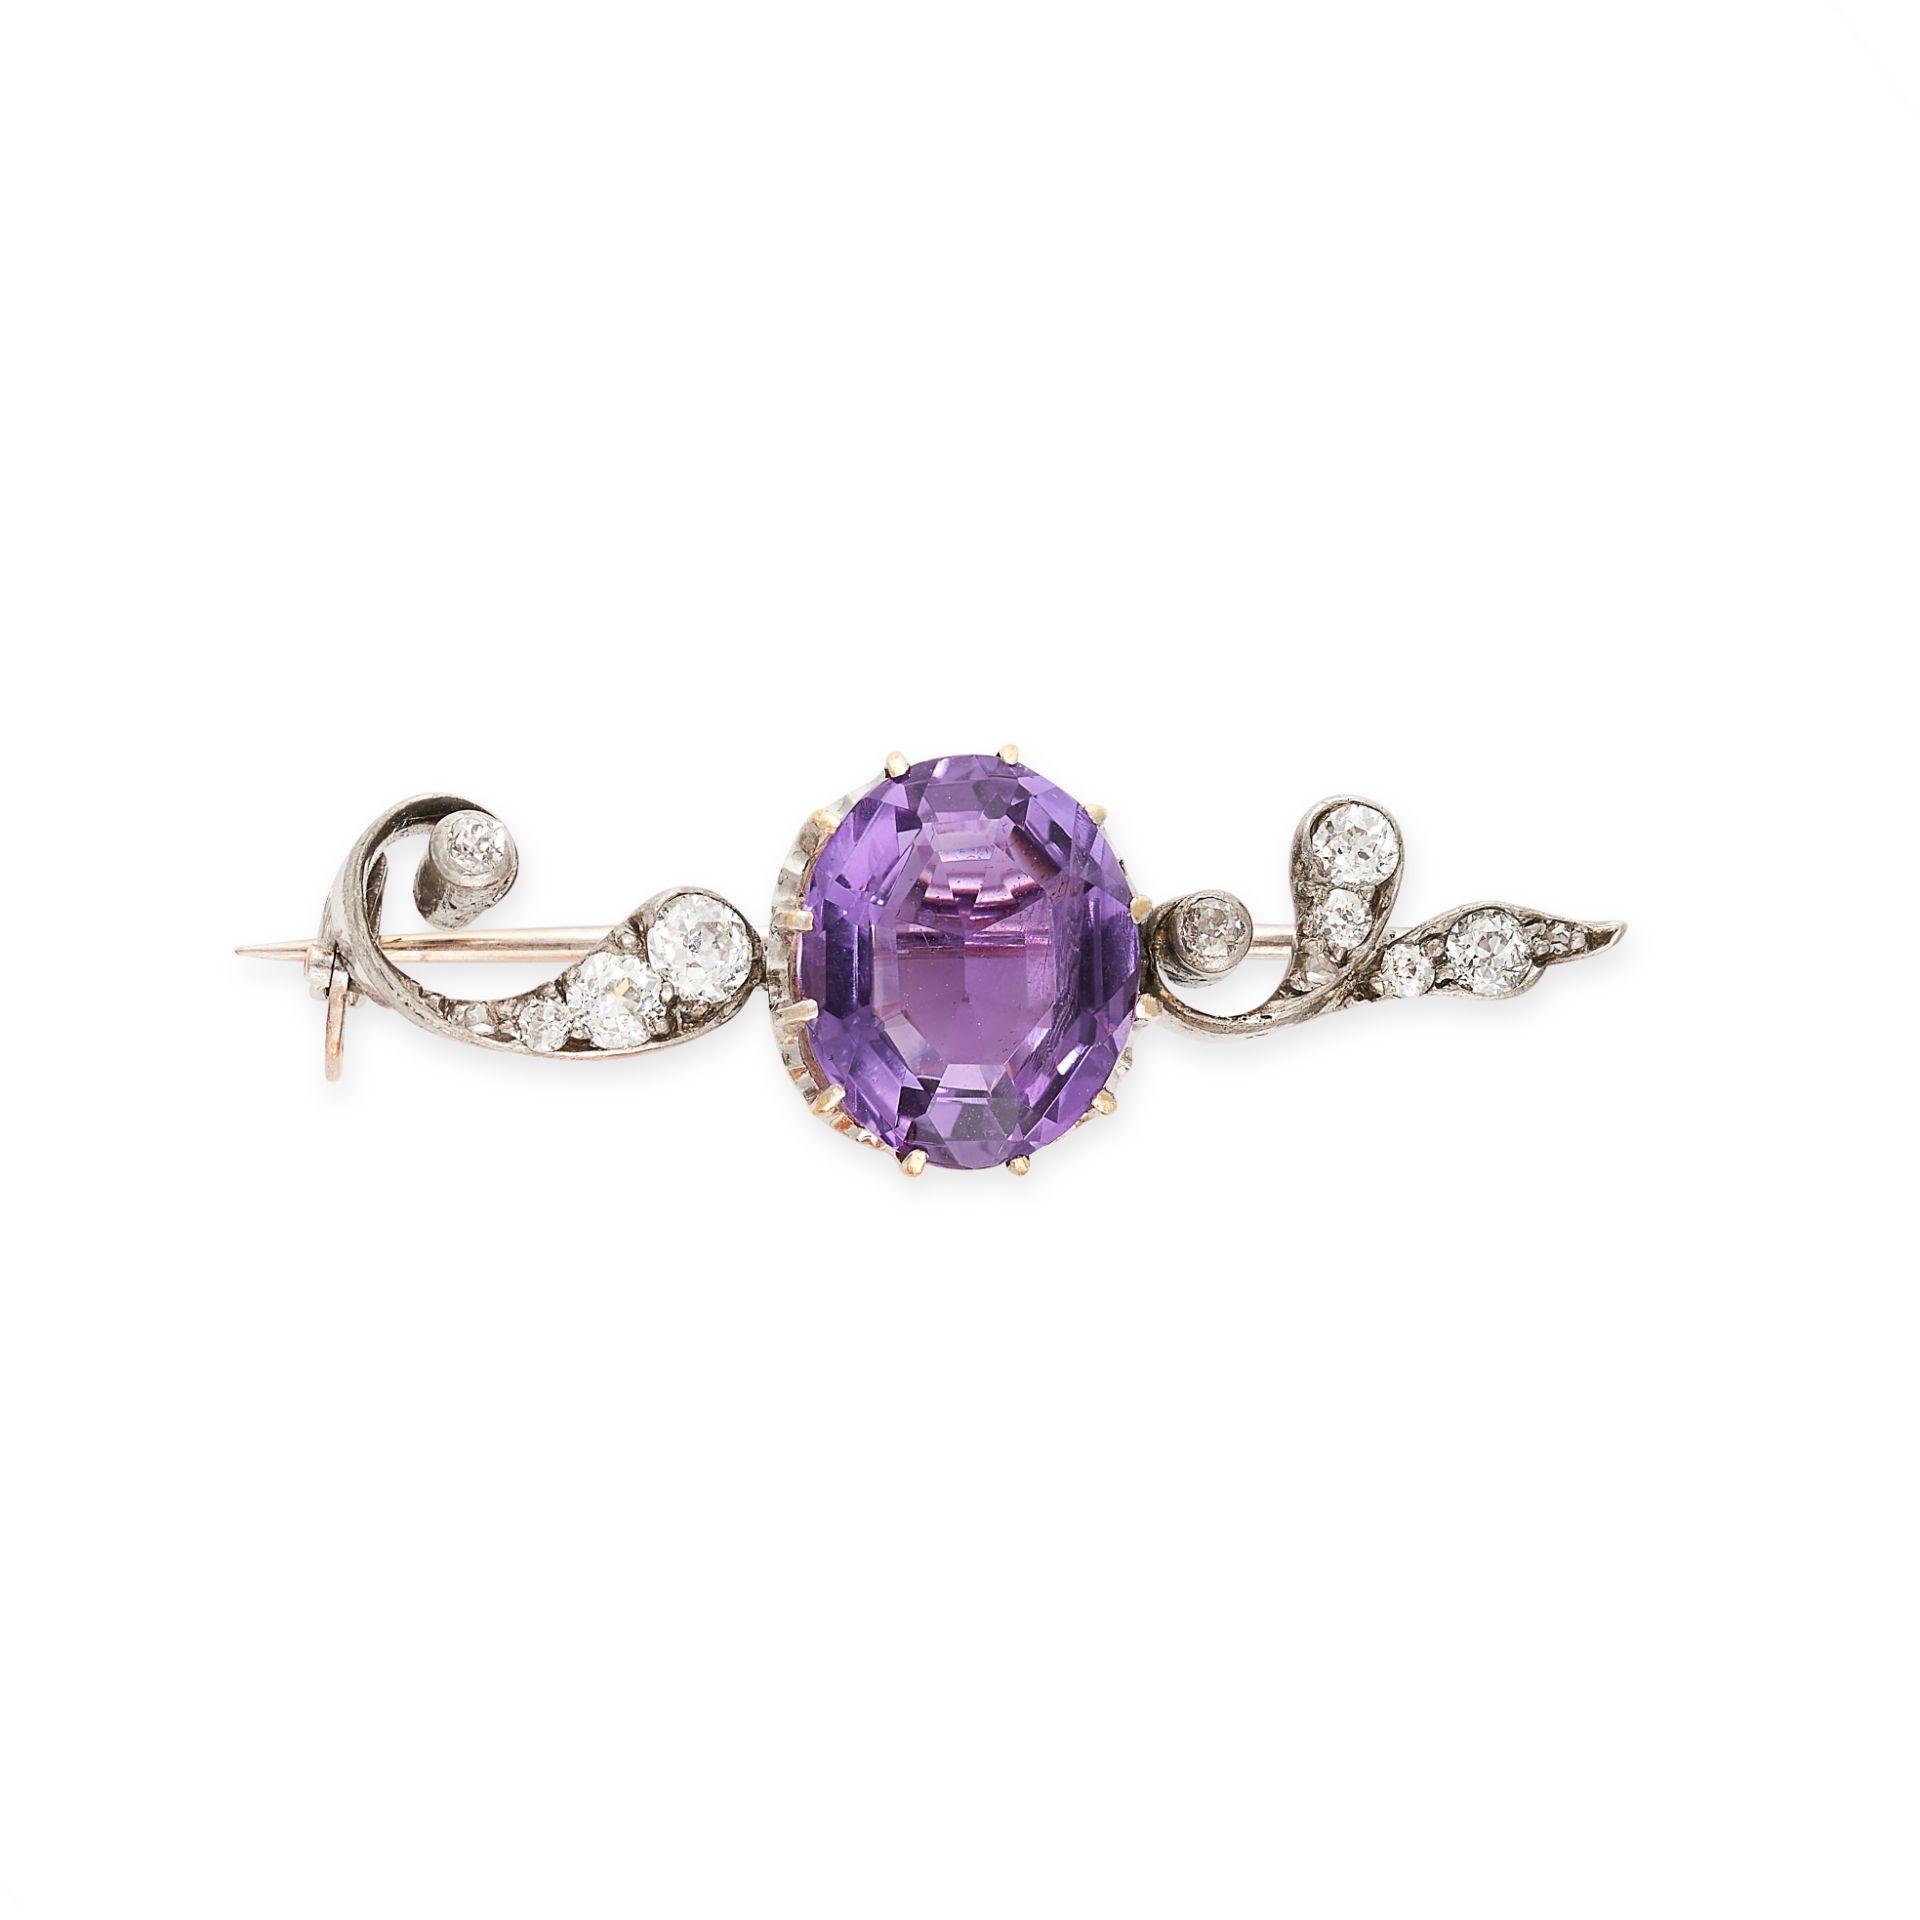 NO RESERVE - AN AMETHYST AND DIAMOND BROOCH  Oval cut amethyst, weighing approximately 3.96